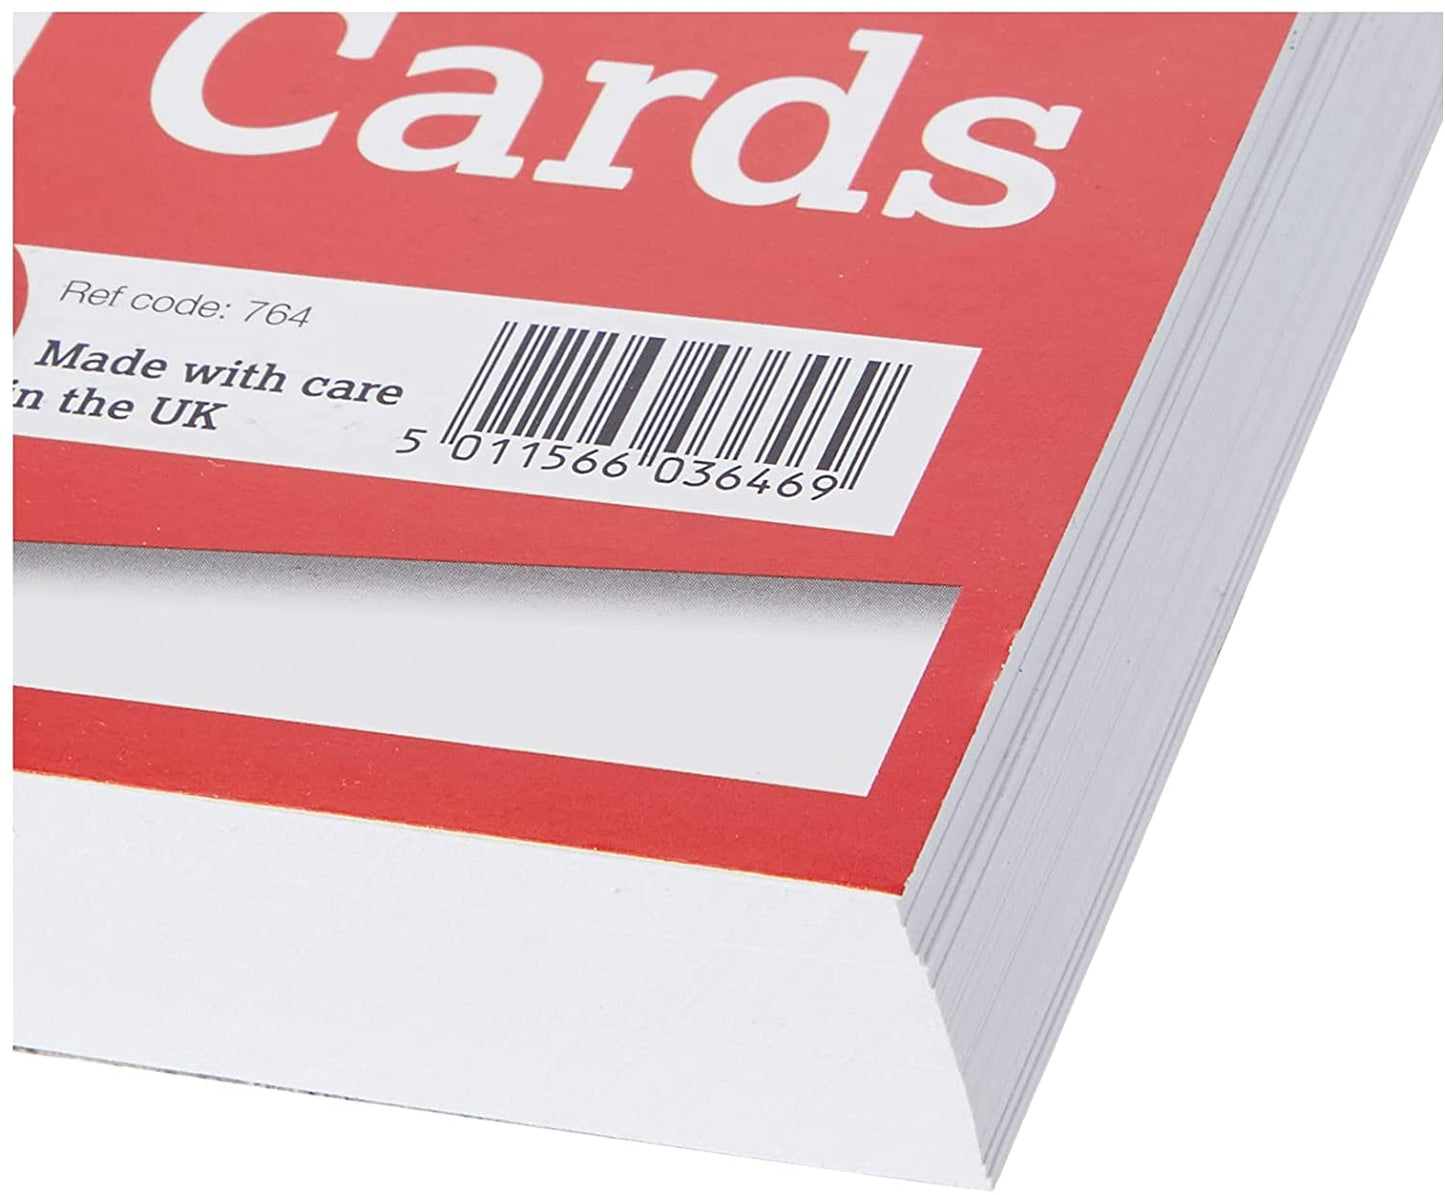 Pack of 100 Plain White Record Cards 152x101mm